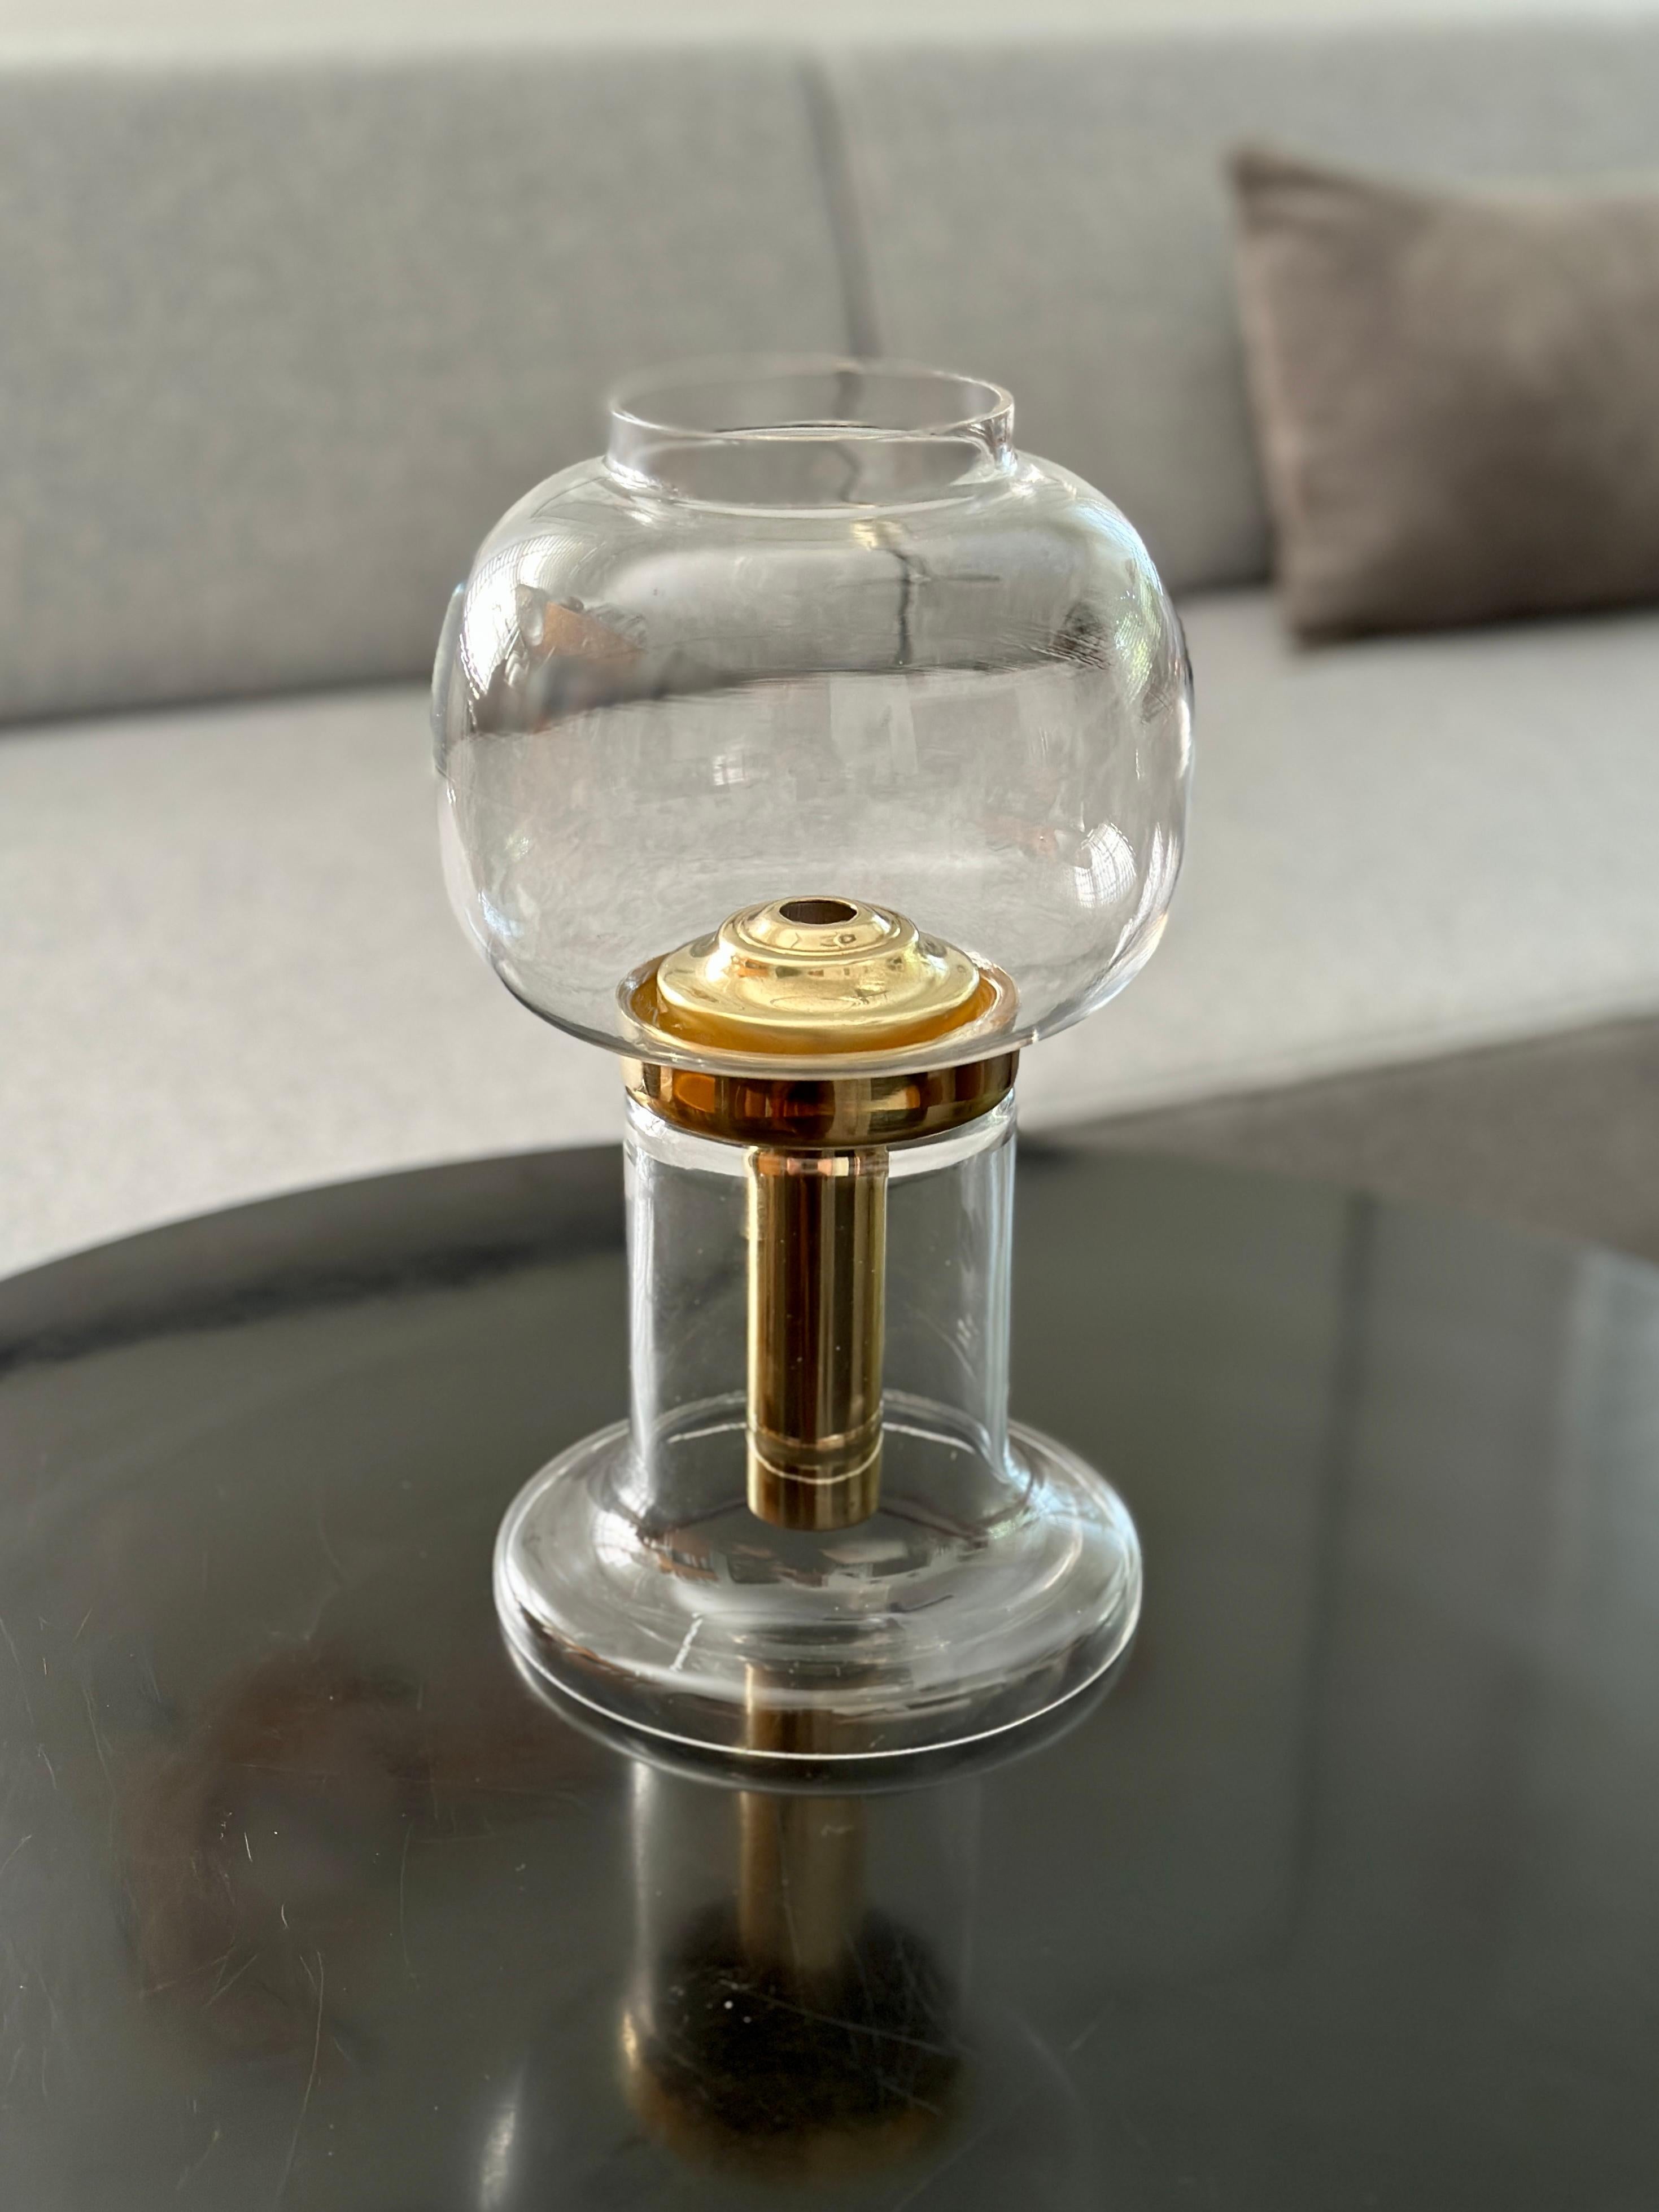 DESCRIPTION

A lamp / lantern designed by Hans-Agne Jakobsson and produced by his own company, Hans-Agne Jakobsson AB sometime in the 1970’s. The candlestick mechanism is solid brass with a glass base and globe. The brass mechanism uses a spring to